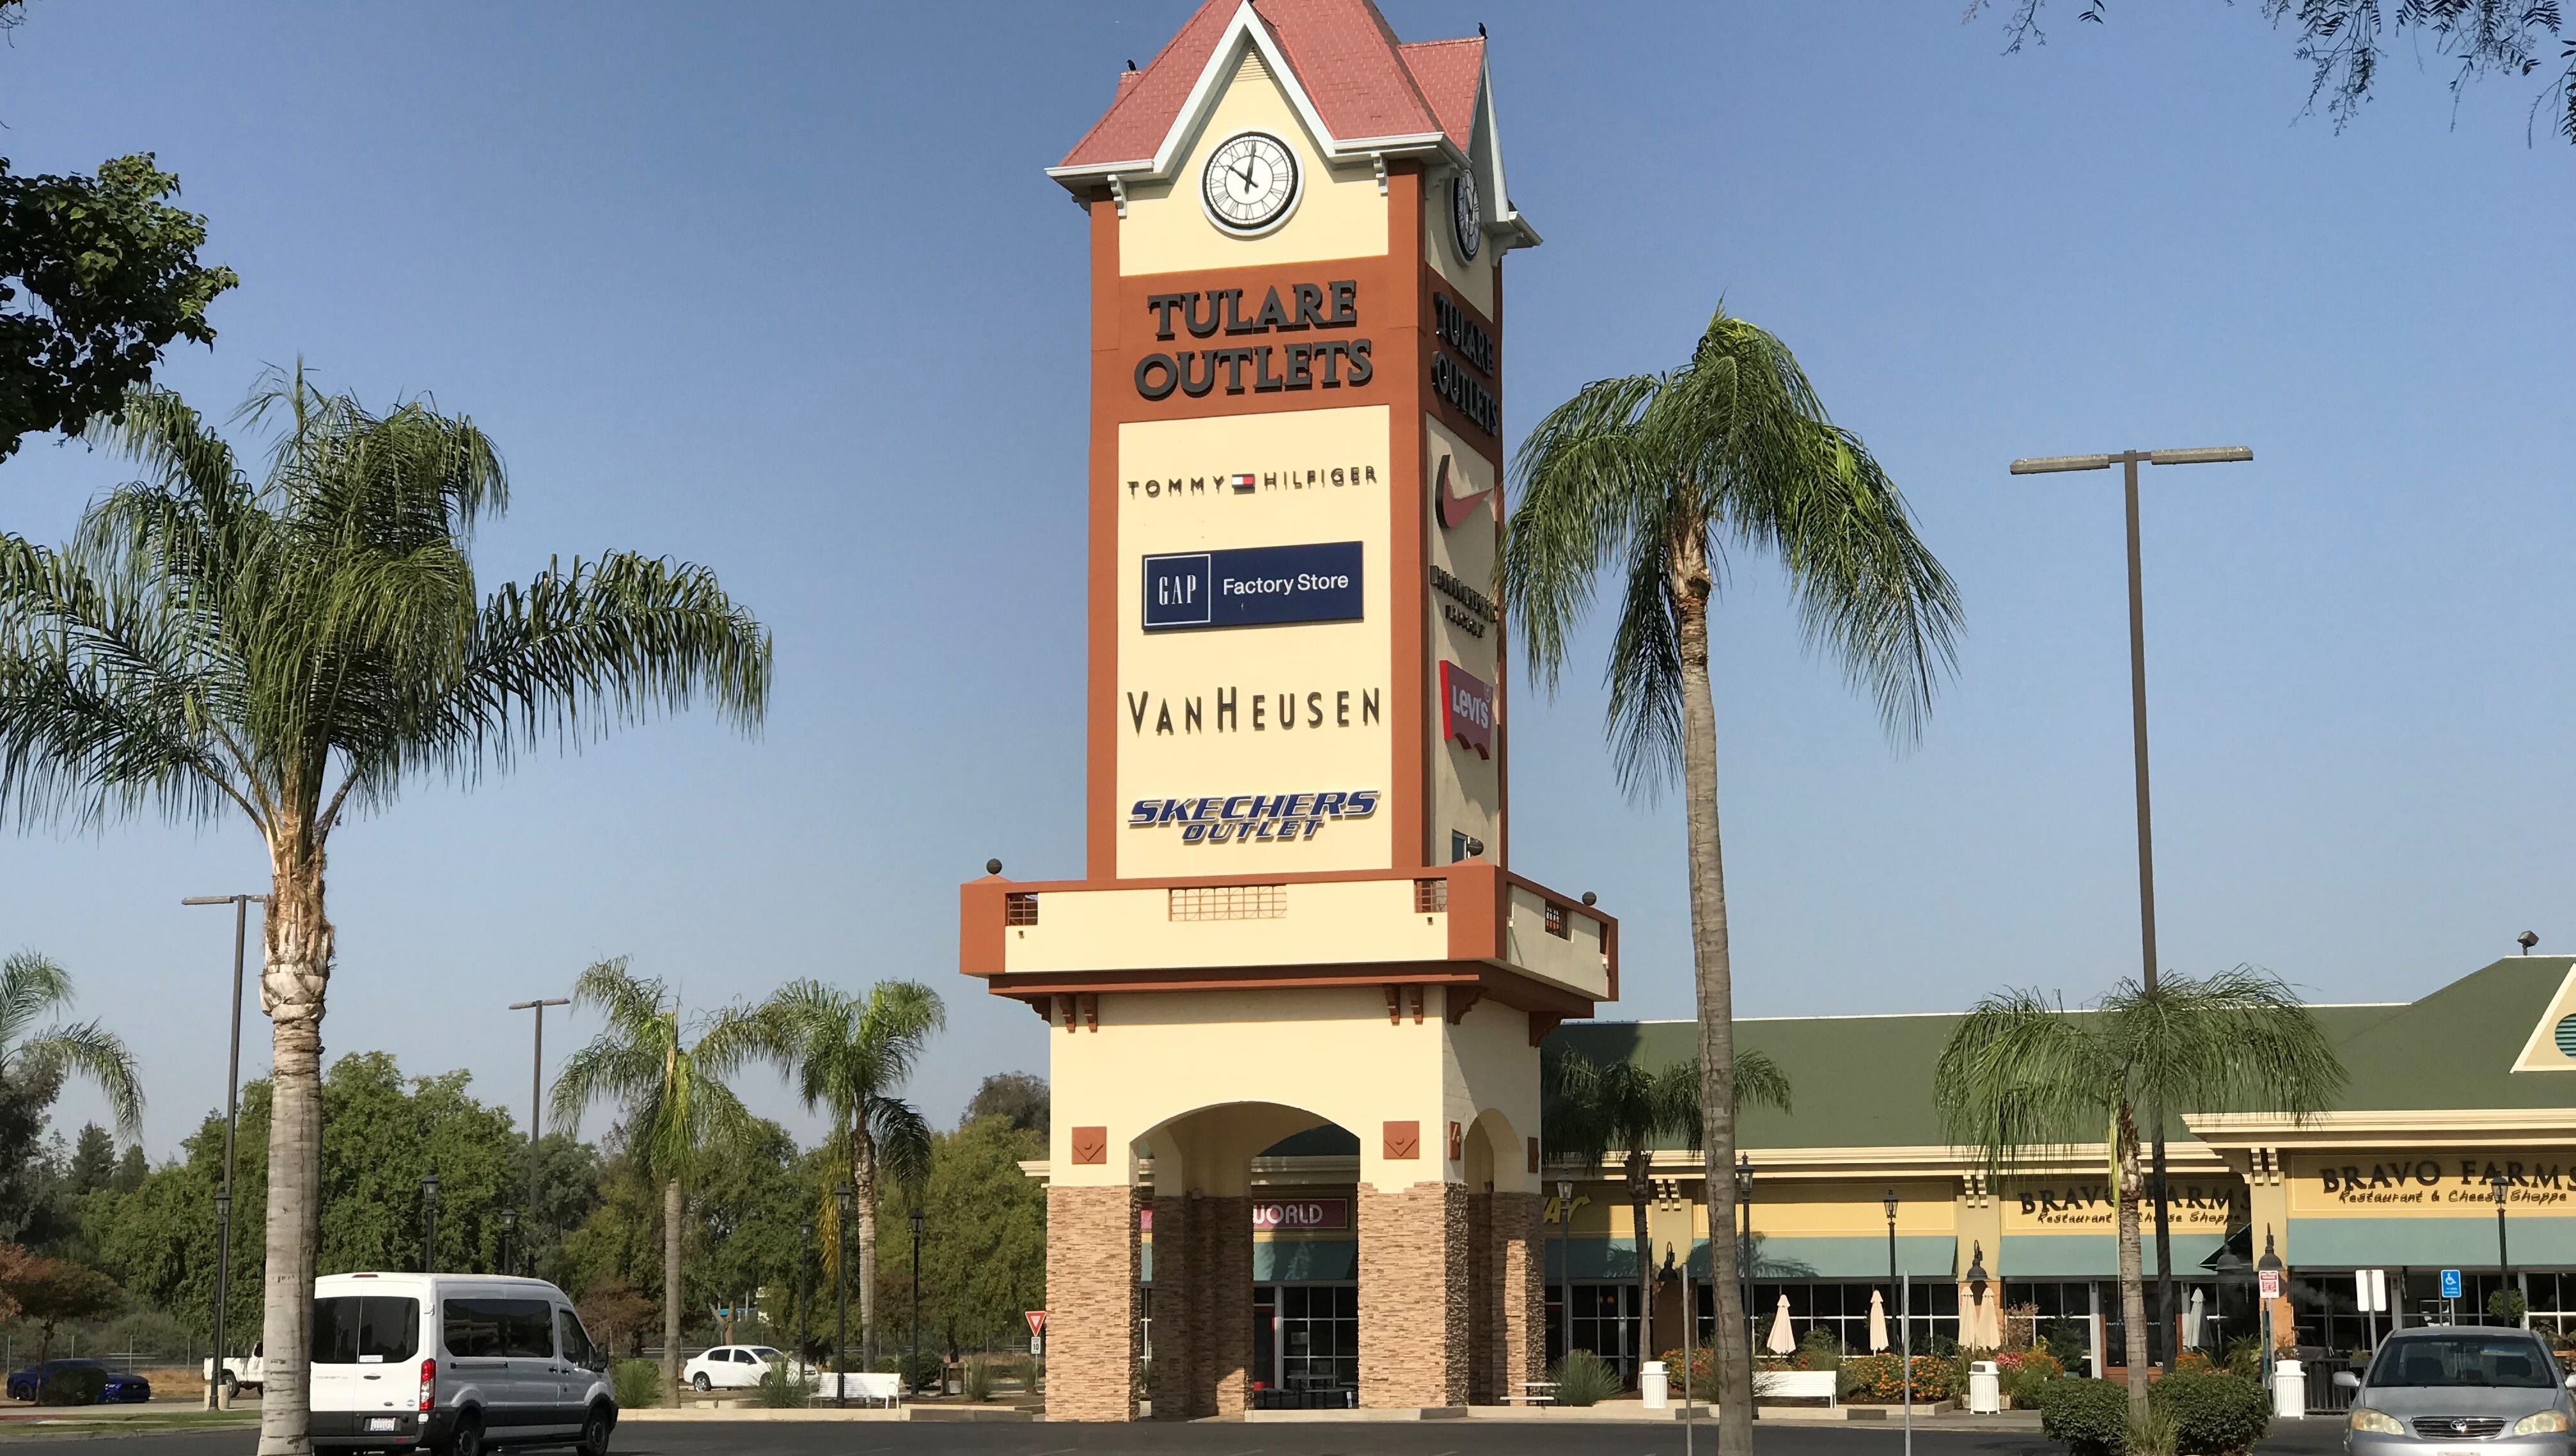 TPD in talks to open office at Tulare Outlets amid high-profile crimes